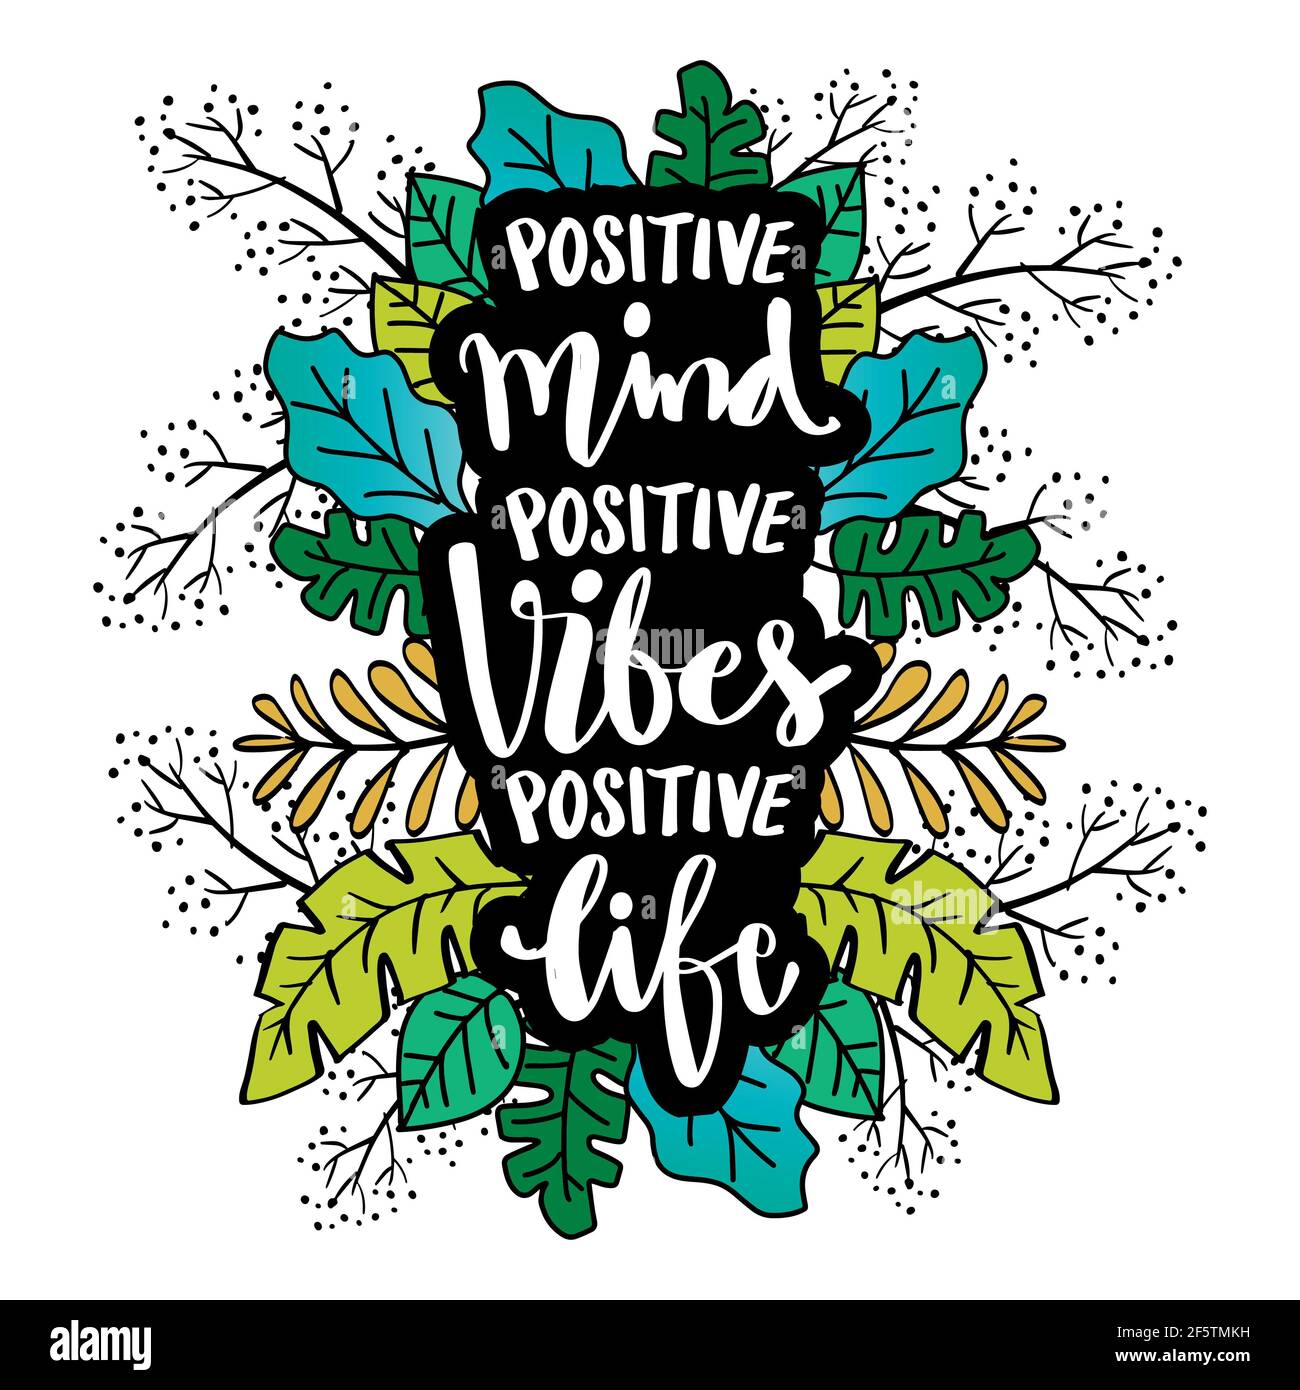 Positive vibes Cut Out Stock Images & Pictures - Alamy